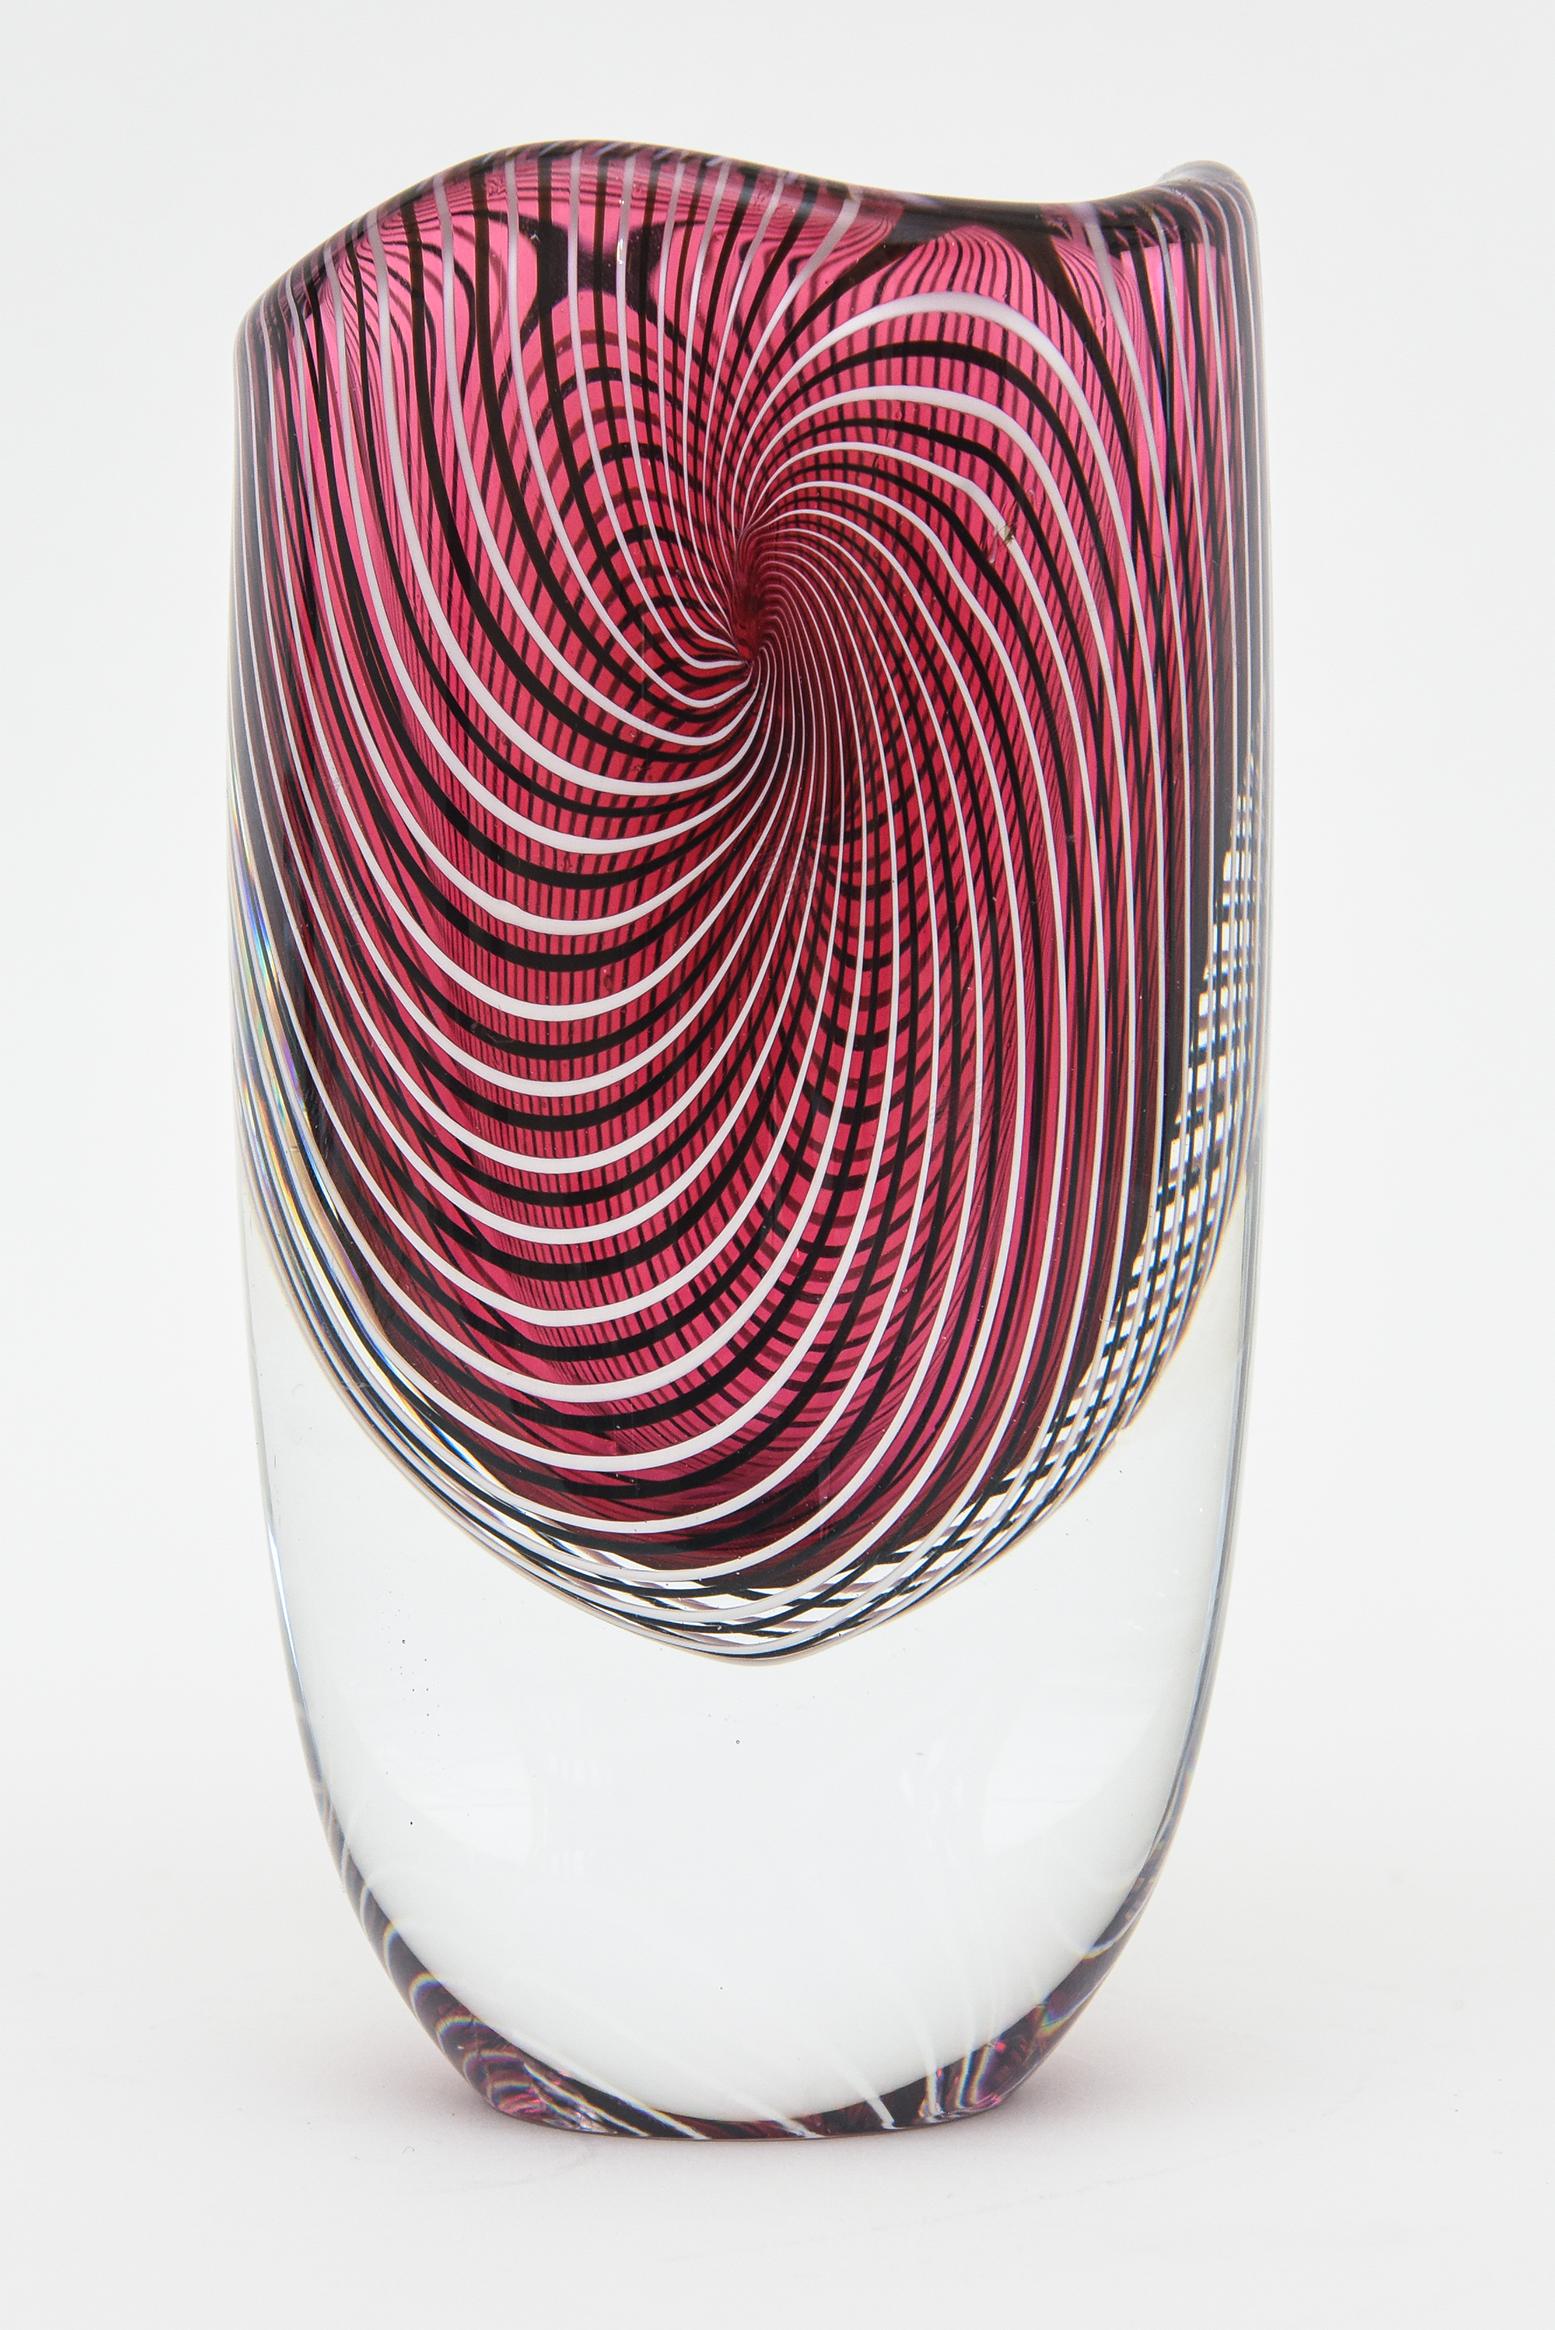 This mesmerizing beautiful vintage Murano vase by Seguso Viro has great weight to it and a spiral design of continuous stripes surround. The top has a bit of scallop edge.
The original vintage label is intact and reads 